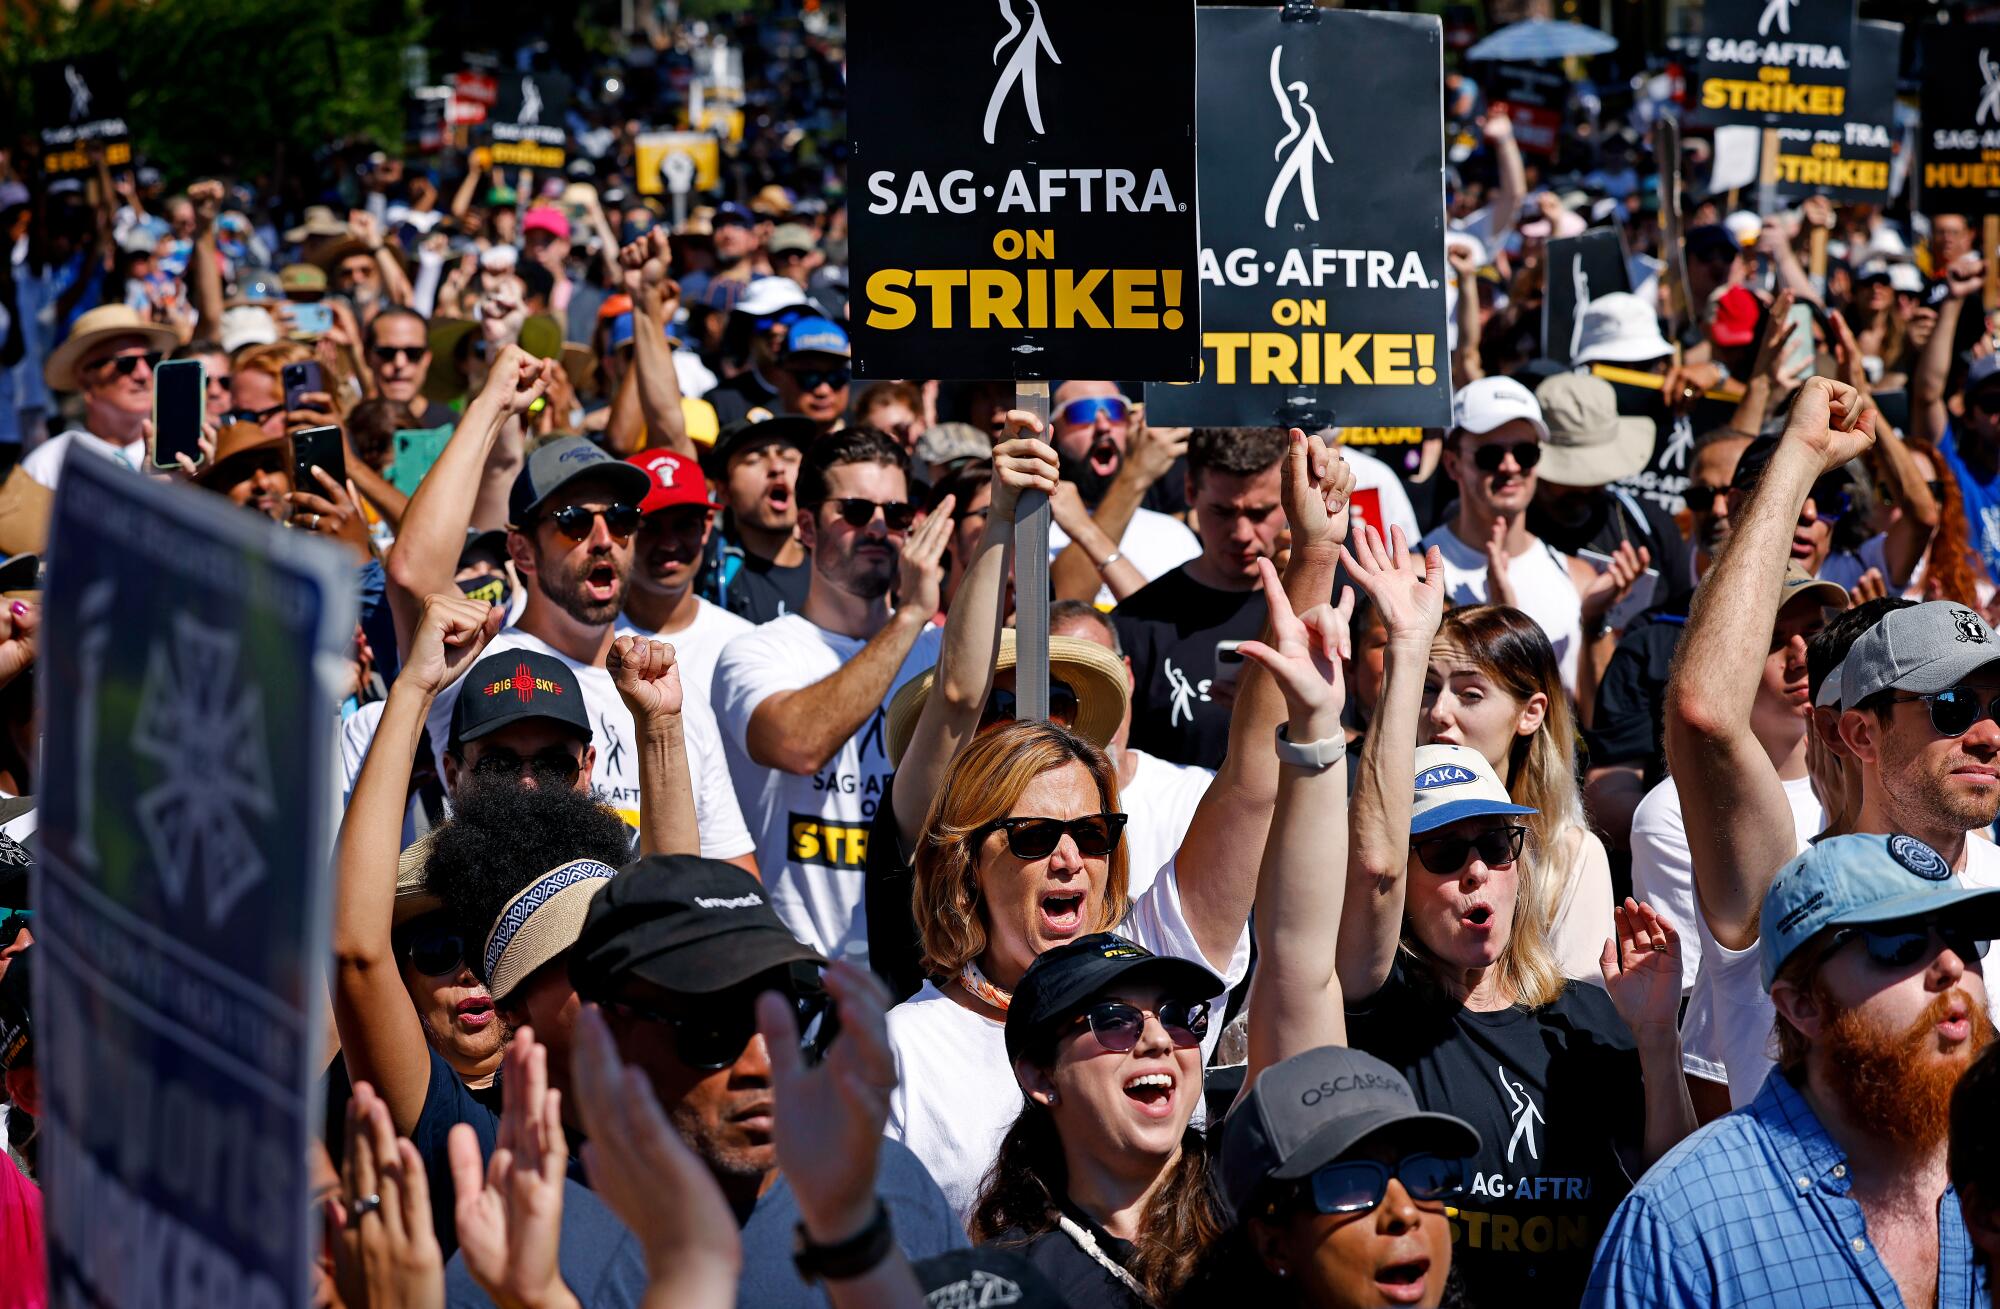 People standing in a crowd holding SAG-AFTRA picket signs.